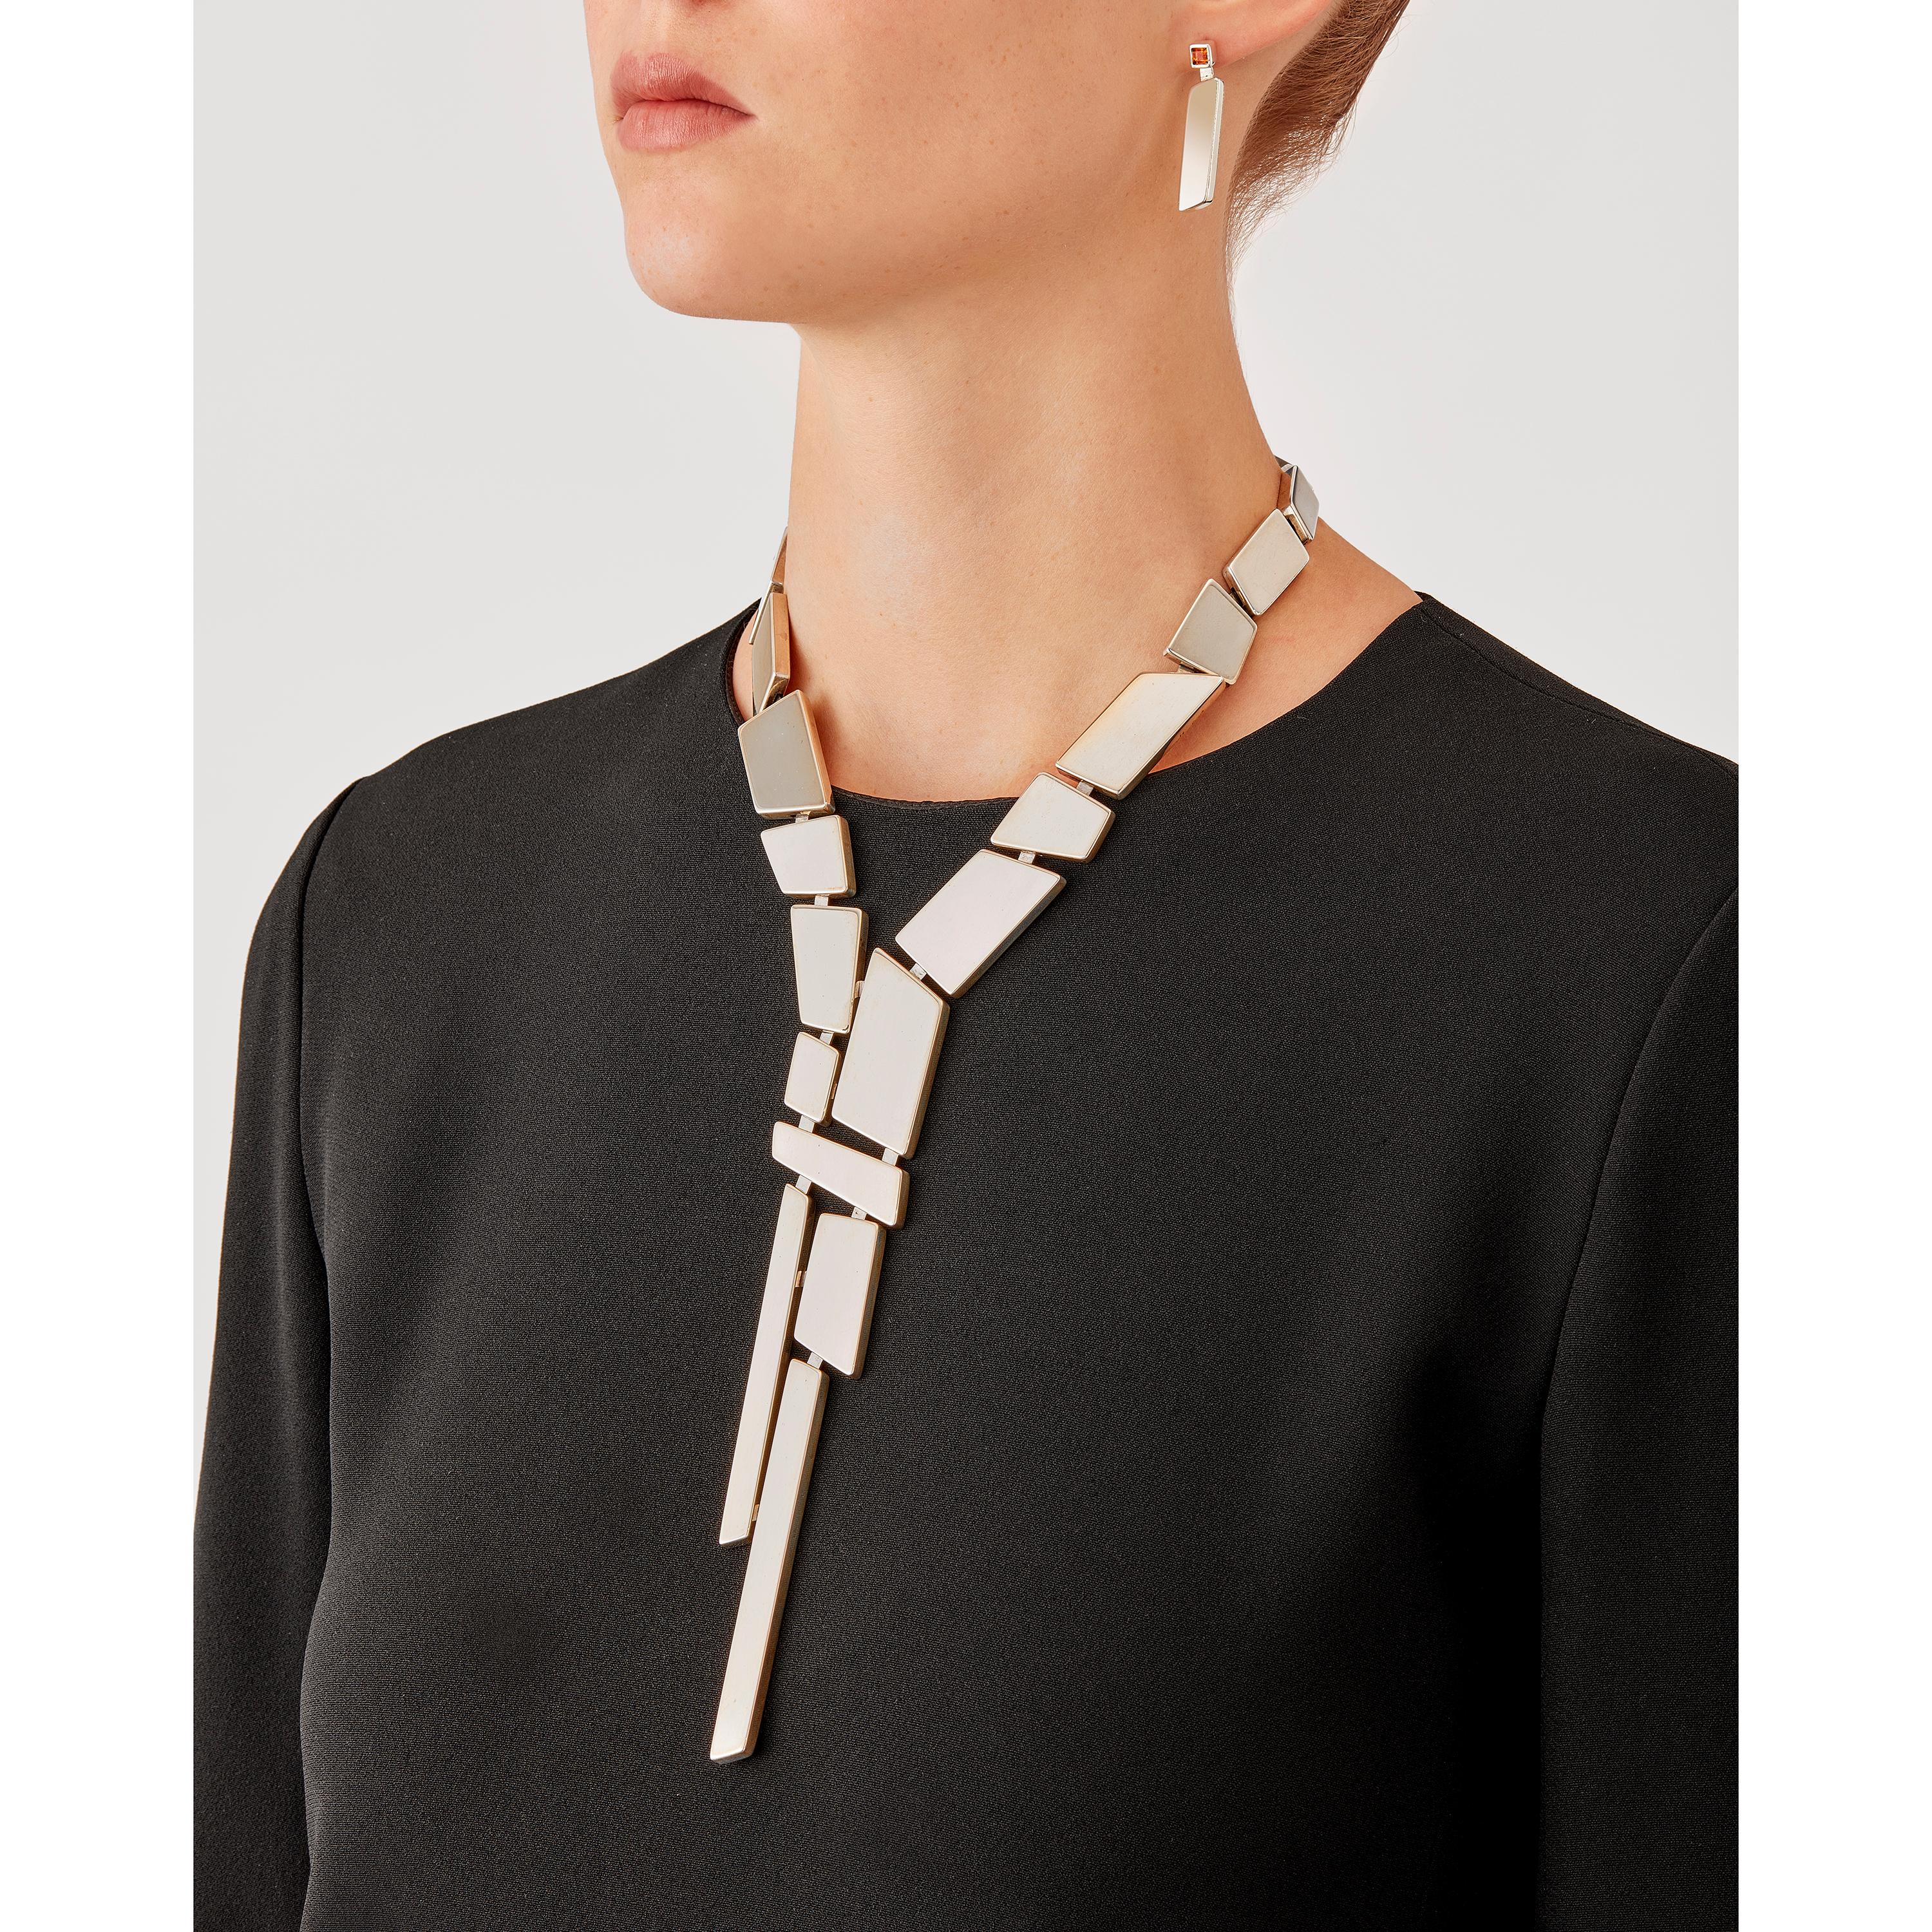 Made by hand in Nathalie Jean's Milan atelier in limited edition, Saphir Absolu Tie Necklace is composed of light hollow geometric volumes with rounded edges in sterling silver. Clever hidden links allow the pieces to drape around the neck and drop